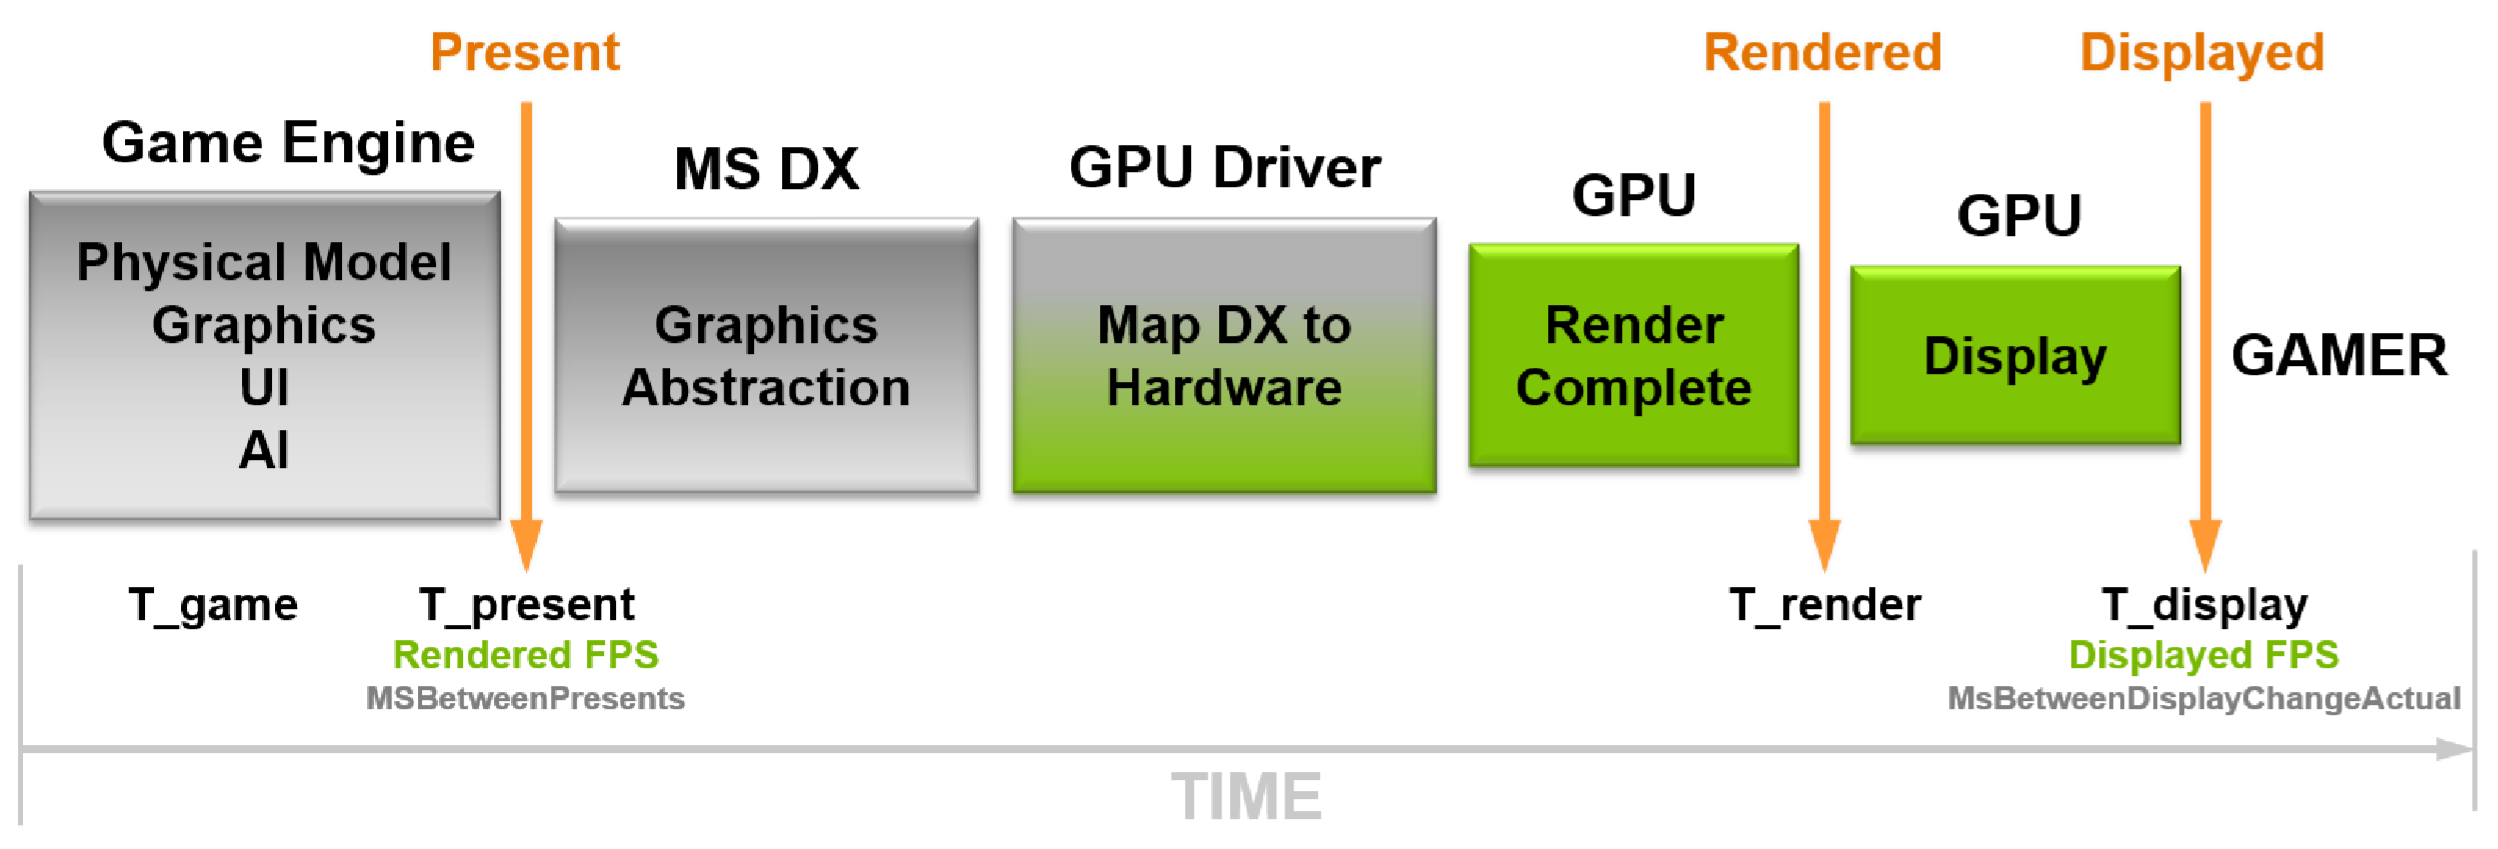 Frameview Performance And Power Benchmarking App Free Download Available Now Geforce News Nvidia